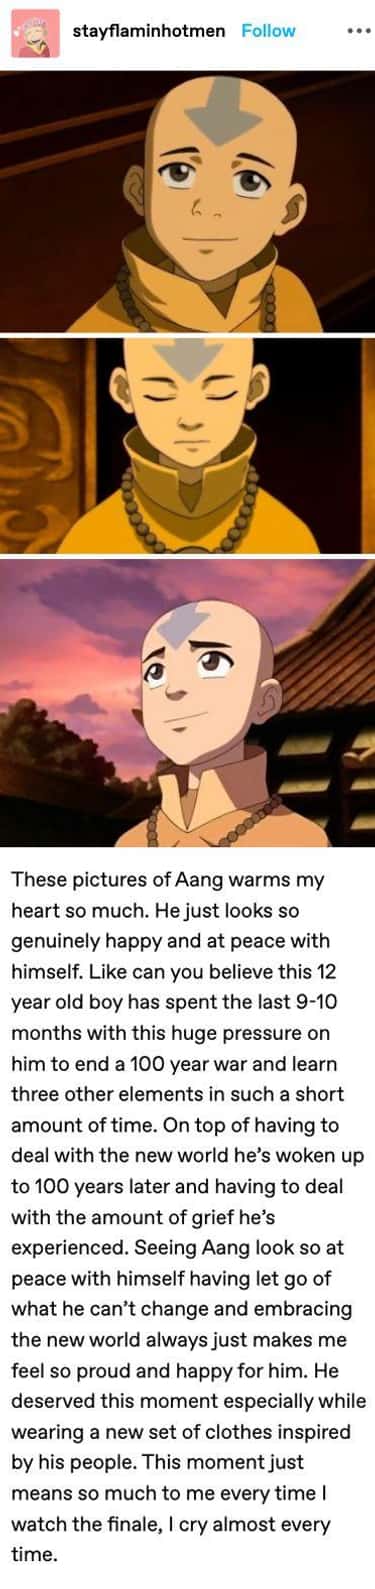  Pro-Aang: 21 Posts That Made Us Regret Ignoring His Character Arc This post of Aang seems to be at peace after he has let go of the things he can't change and embrace the new world